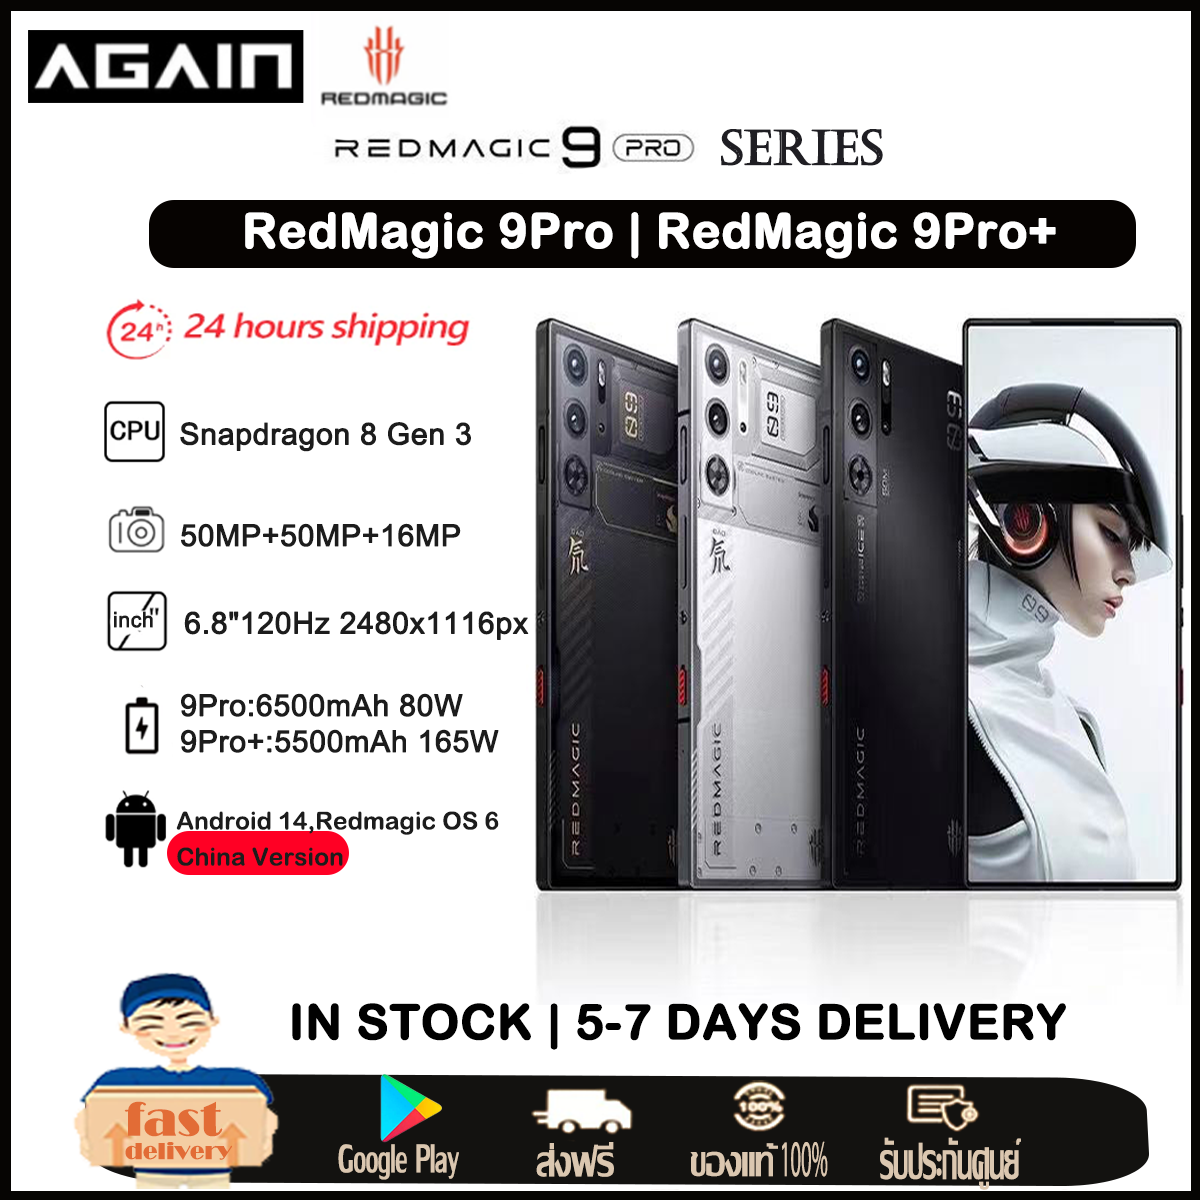 Global Rom】Nubia Red Magic 9 Pro+ / Red Magic 9 Pro 6.8 inches